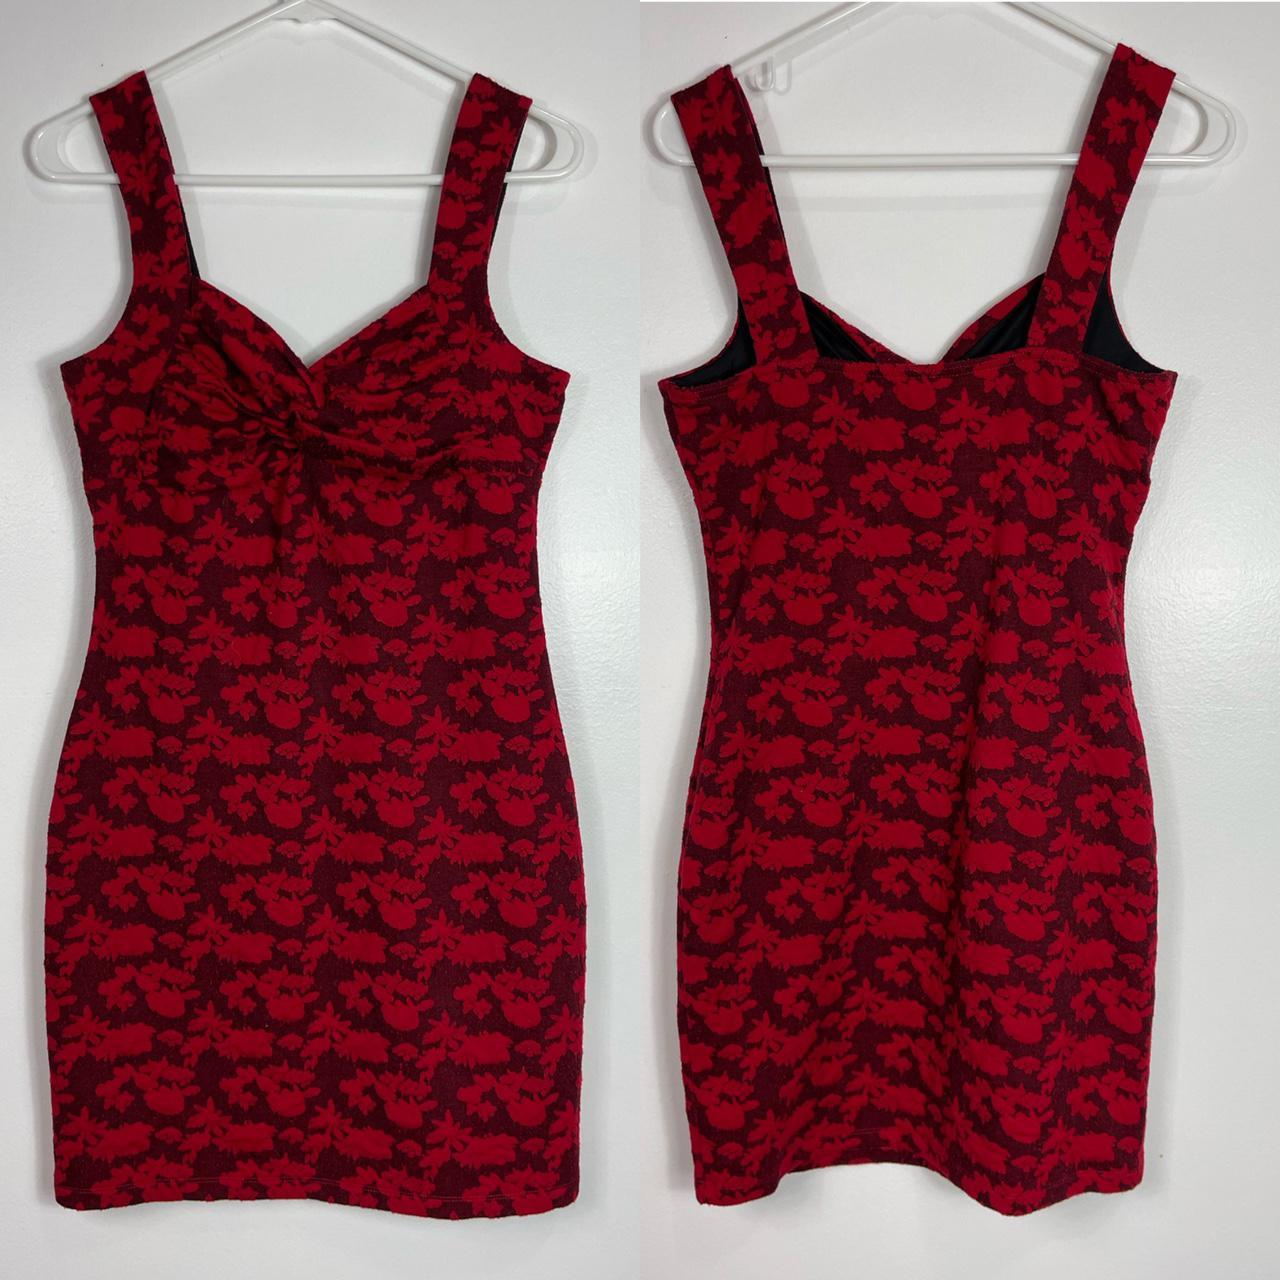 Candie's Women's Red and Black Dress (2)